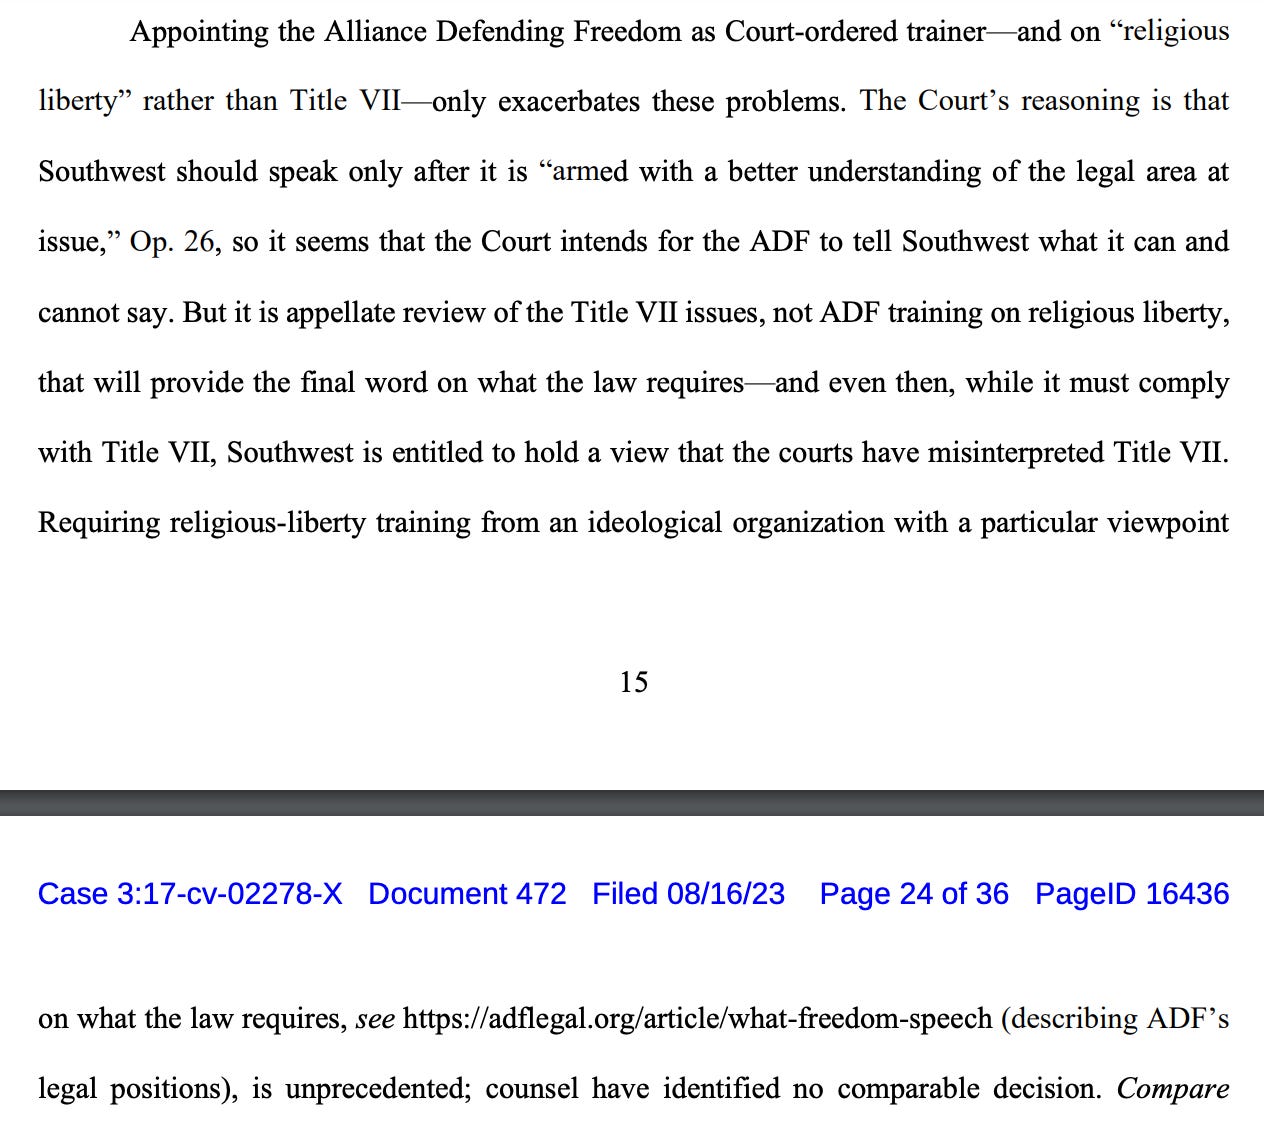 Appointing the Alliance Defending Freedom as Court-ordered trainer—and on “religious liberty” rather than Title VII—only exacerbates these problems. The Court’s reasoning is that Southwest should speak only after it is “armed with a better understanding of the legal area at issue,” Op. 26, so it seems that the Court intends for the ADF to tell Southwest what it can and cannot say. But it is appellate review of the Title VII issues, not ADF training on religious liberty, that will provide the final word on what the law requires—and even then, while it must comply with Title VII, Southwest is entitled to hold a view that the courts have misinterpreted Title VII. Requiring religious-liberty training from an ideological organization with a particular viewpoint on what the law requires, see https://adflegal.org/article/what-freedom-speech (describing ADF’s legal positions), is unprecedented; counsel have identified no comparable decision. 